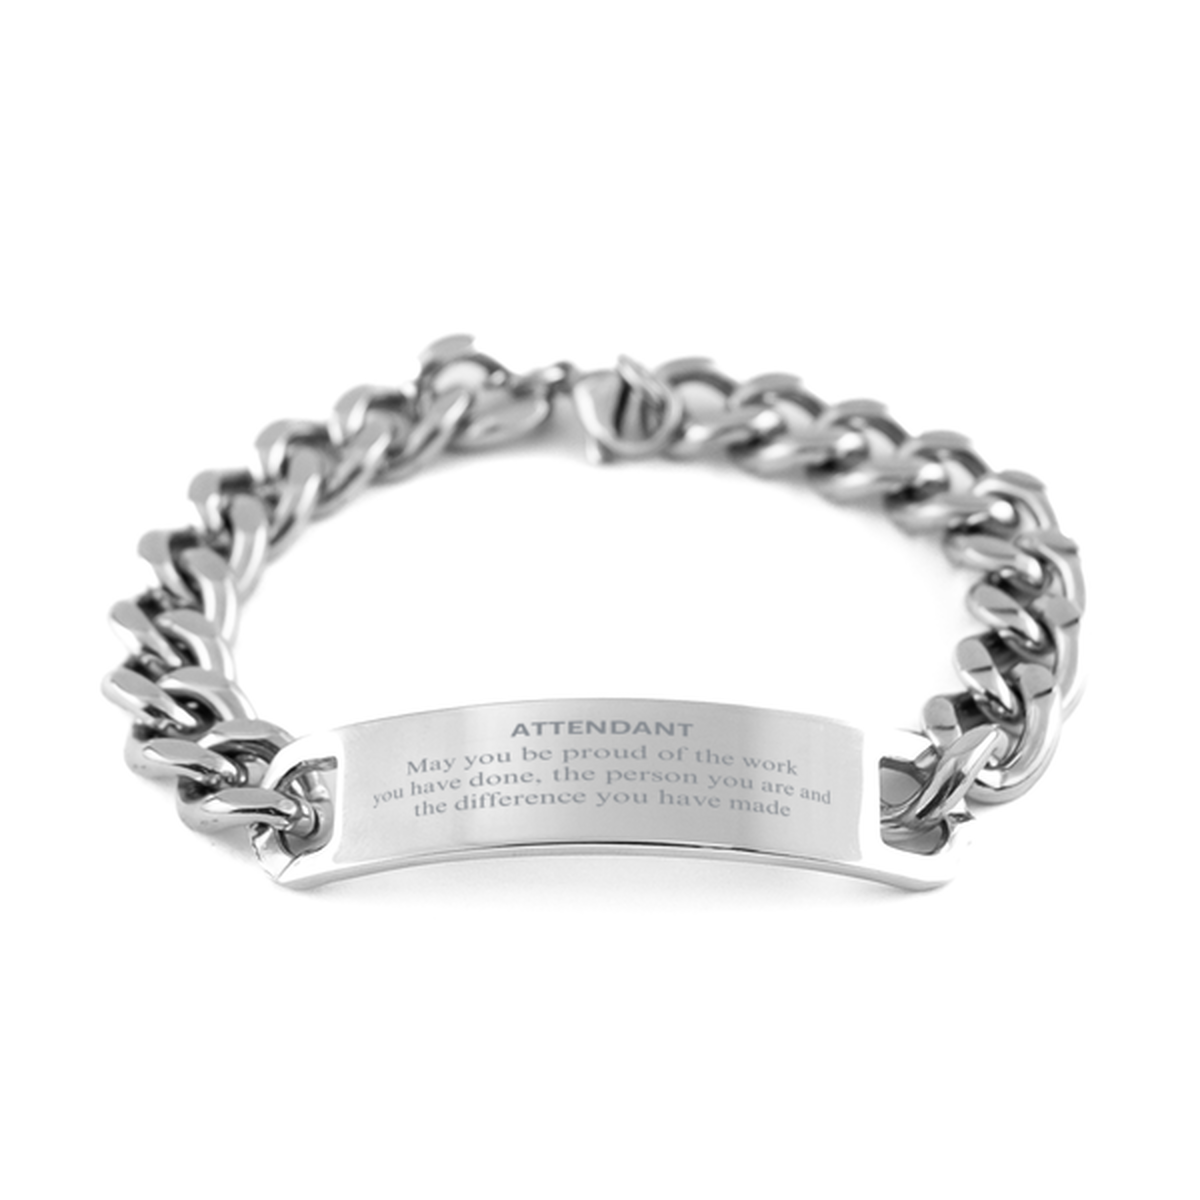 Attendant May you be proud of the work you have done, Retirement Attendant Cuban Chain Stainless Steel Bracelet for Colleague Appreciation Gifts Amazing for Attendant